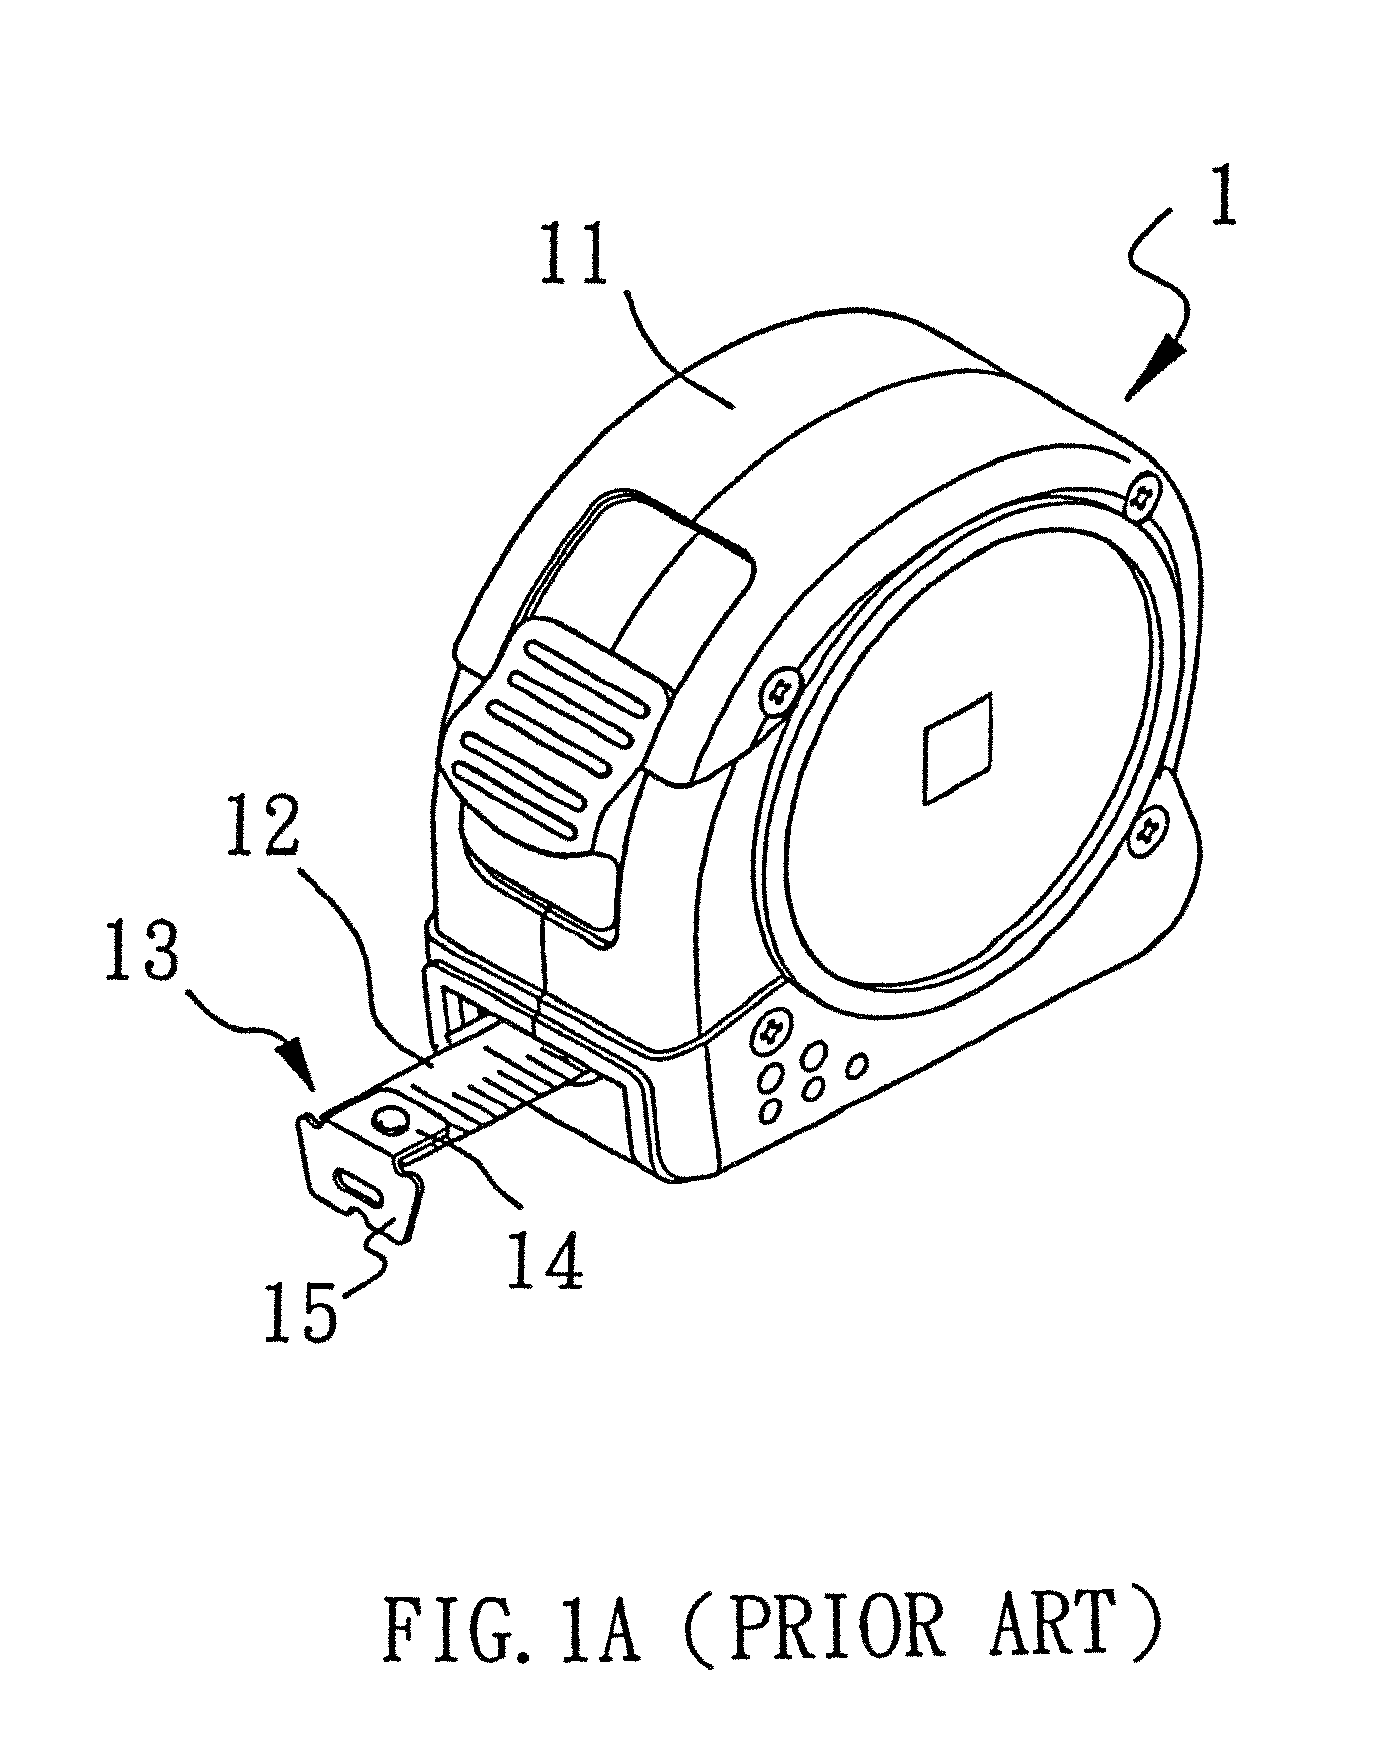 Structure of a measuring tape device